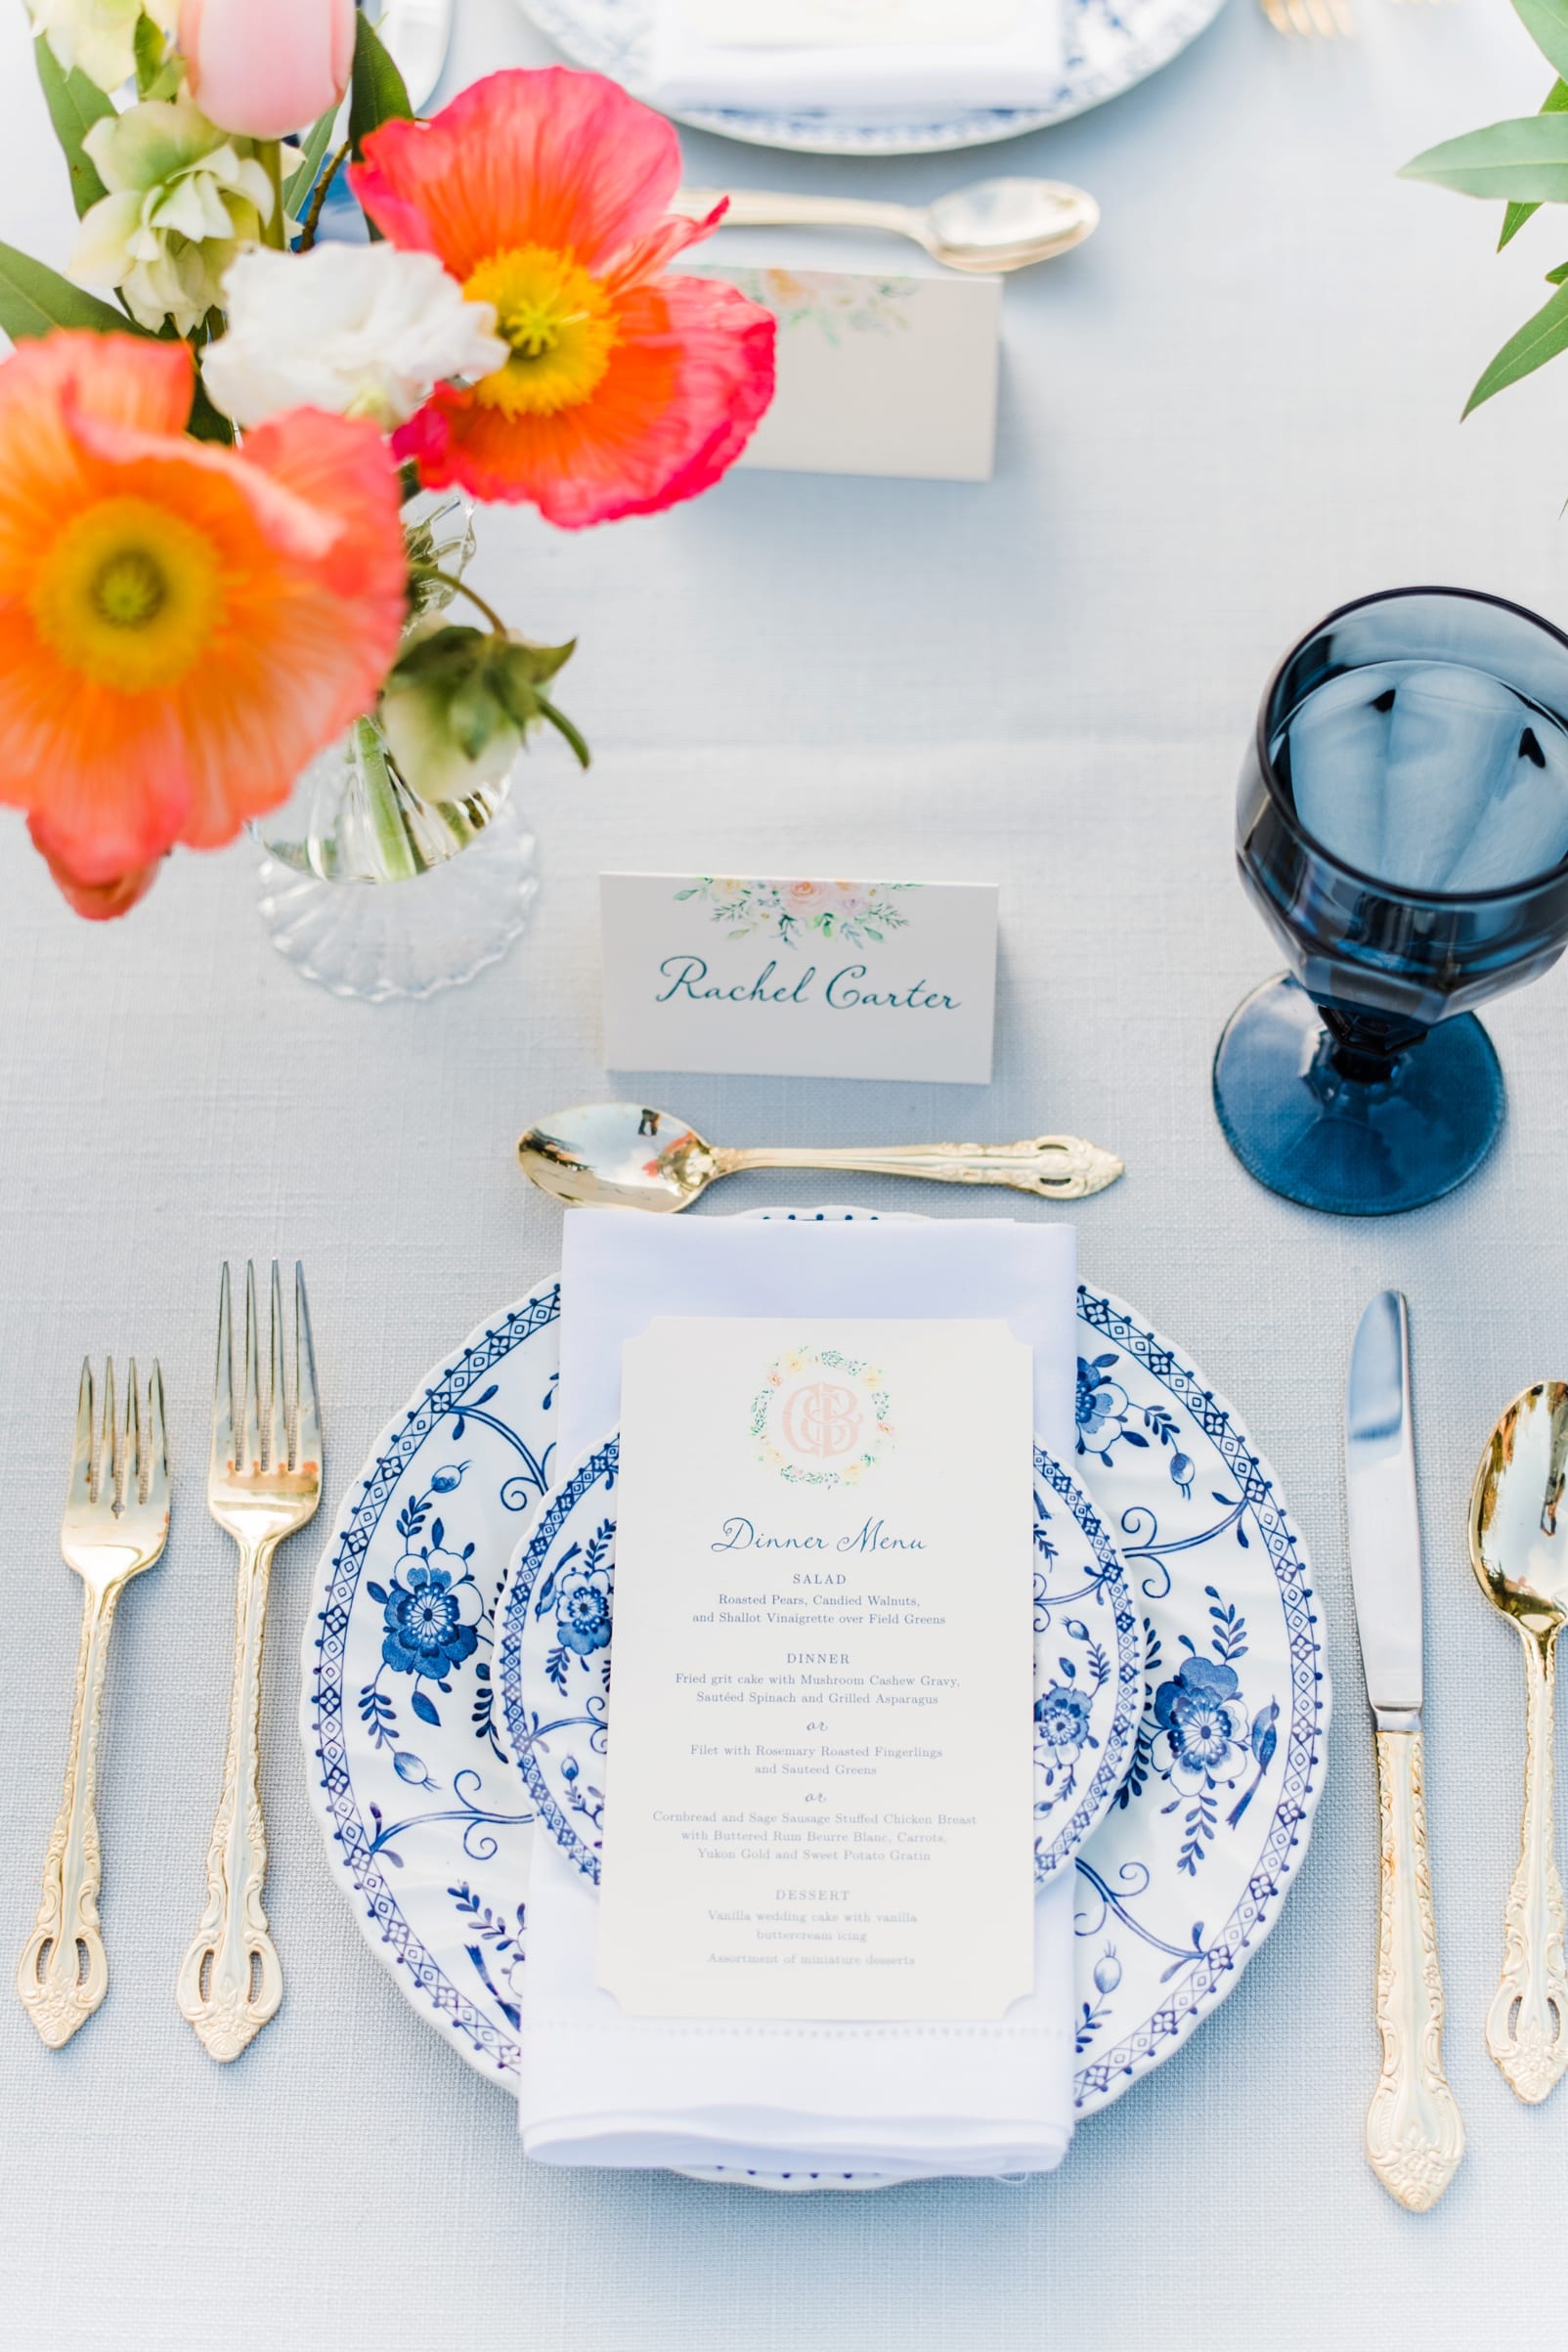 greenhouse picker sisters reception place setting with blue and white china photo